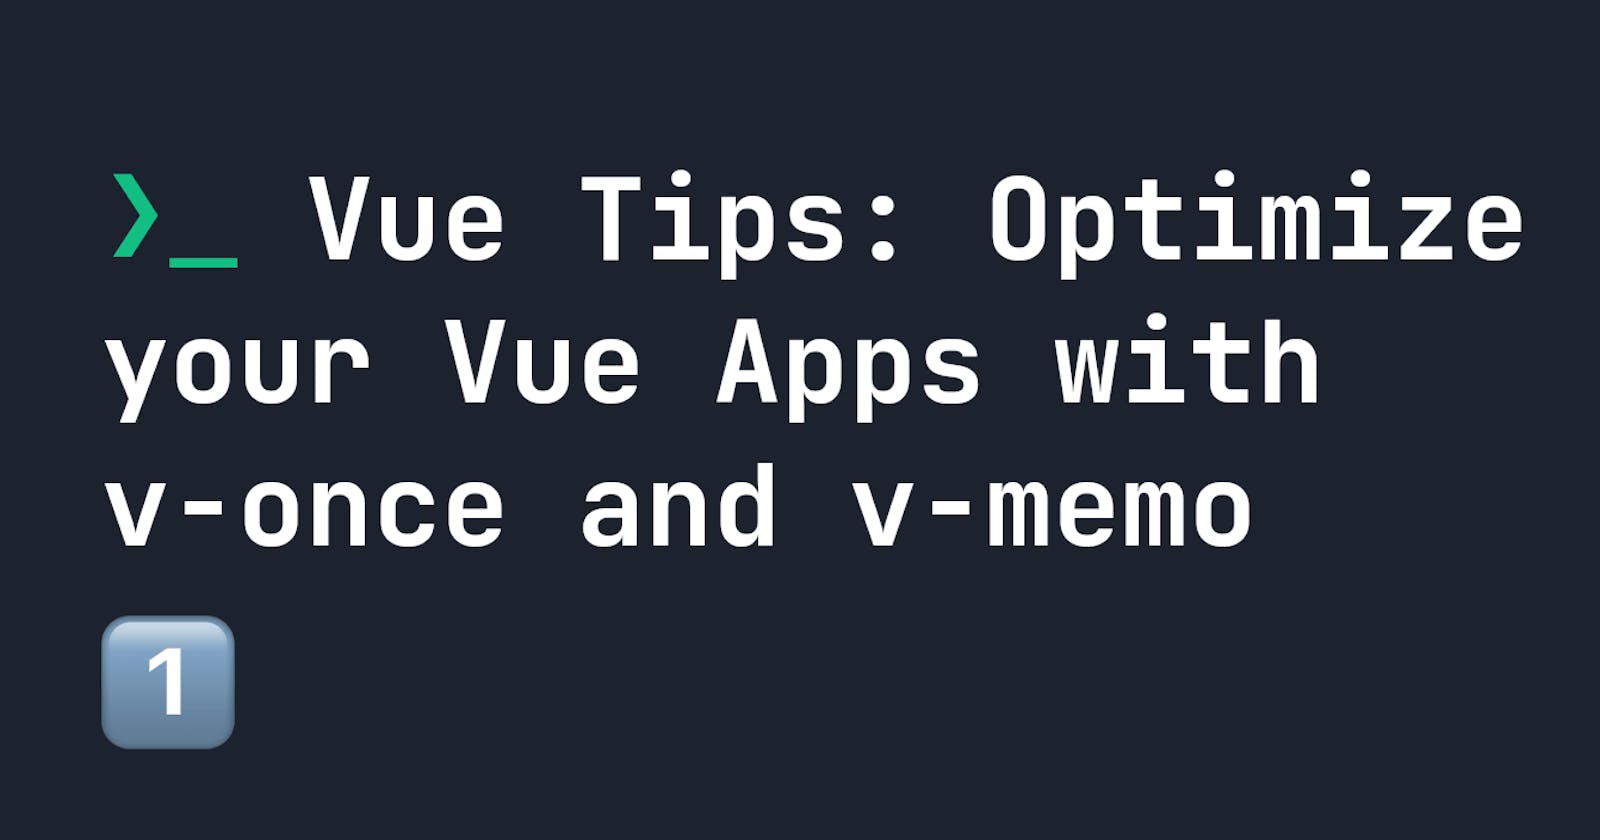 Vue Tips: Optimize your Vue Apps with v-once and v-memo